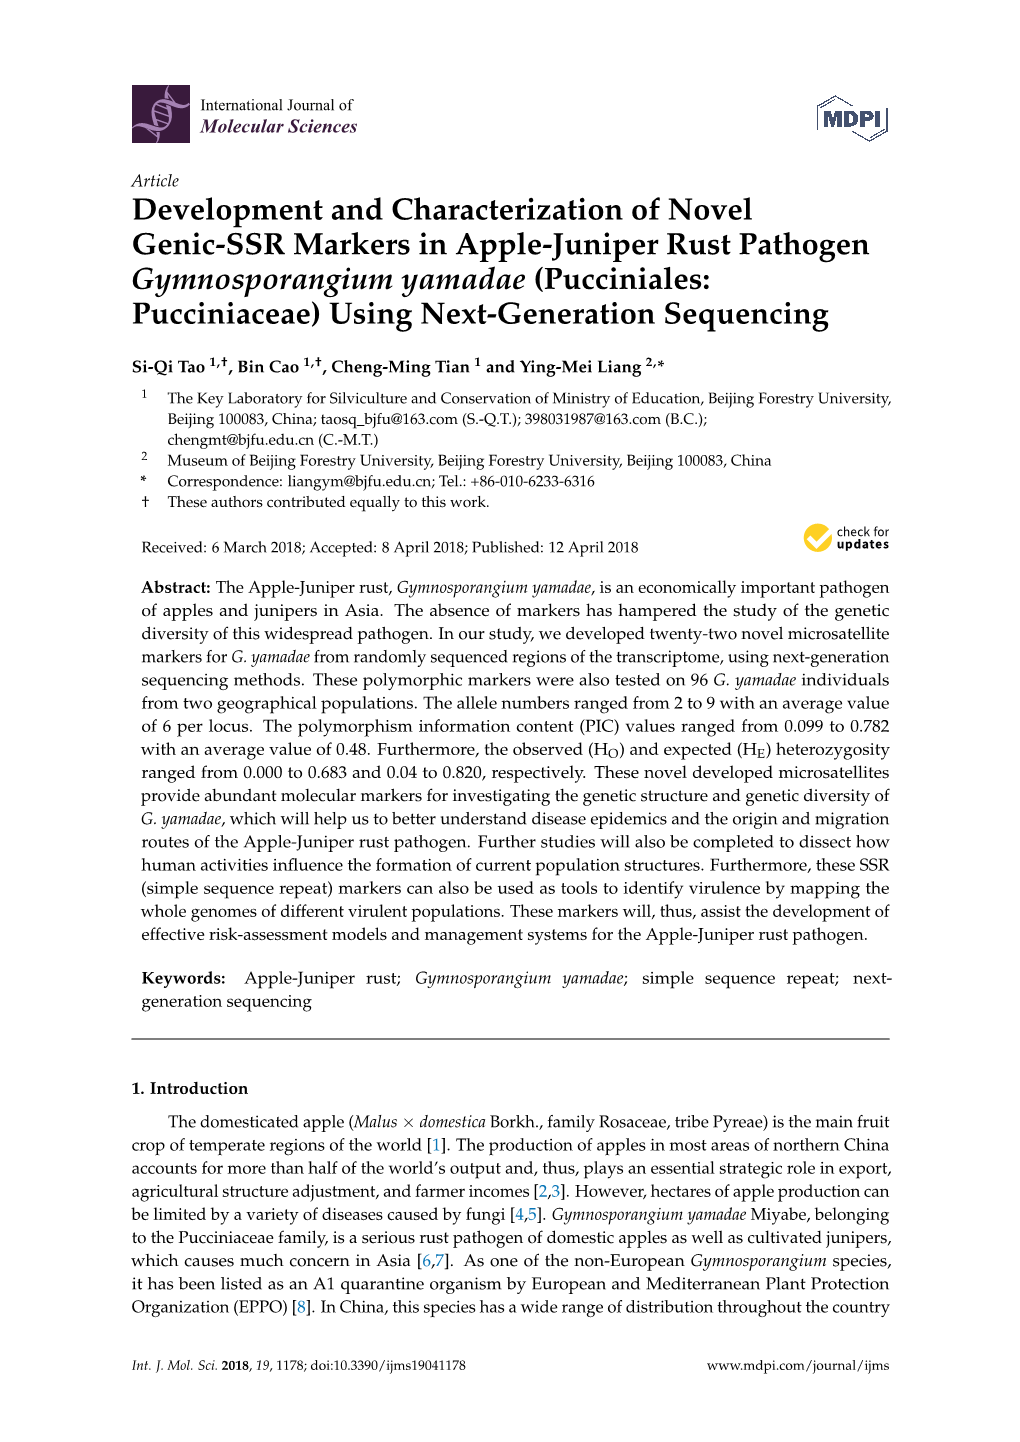 Development and Characterization of Novel Genic-SSR Markers in Apple